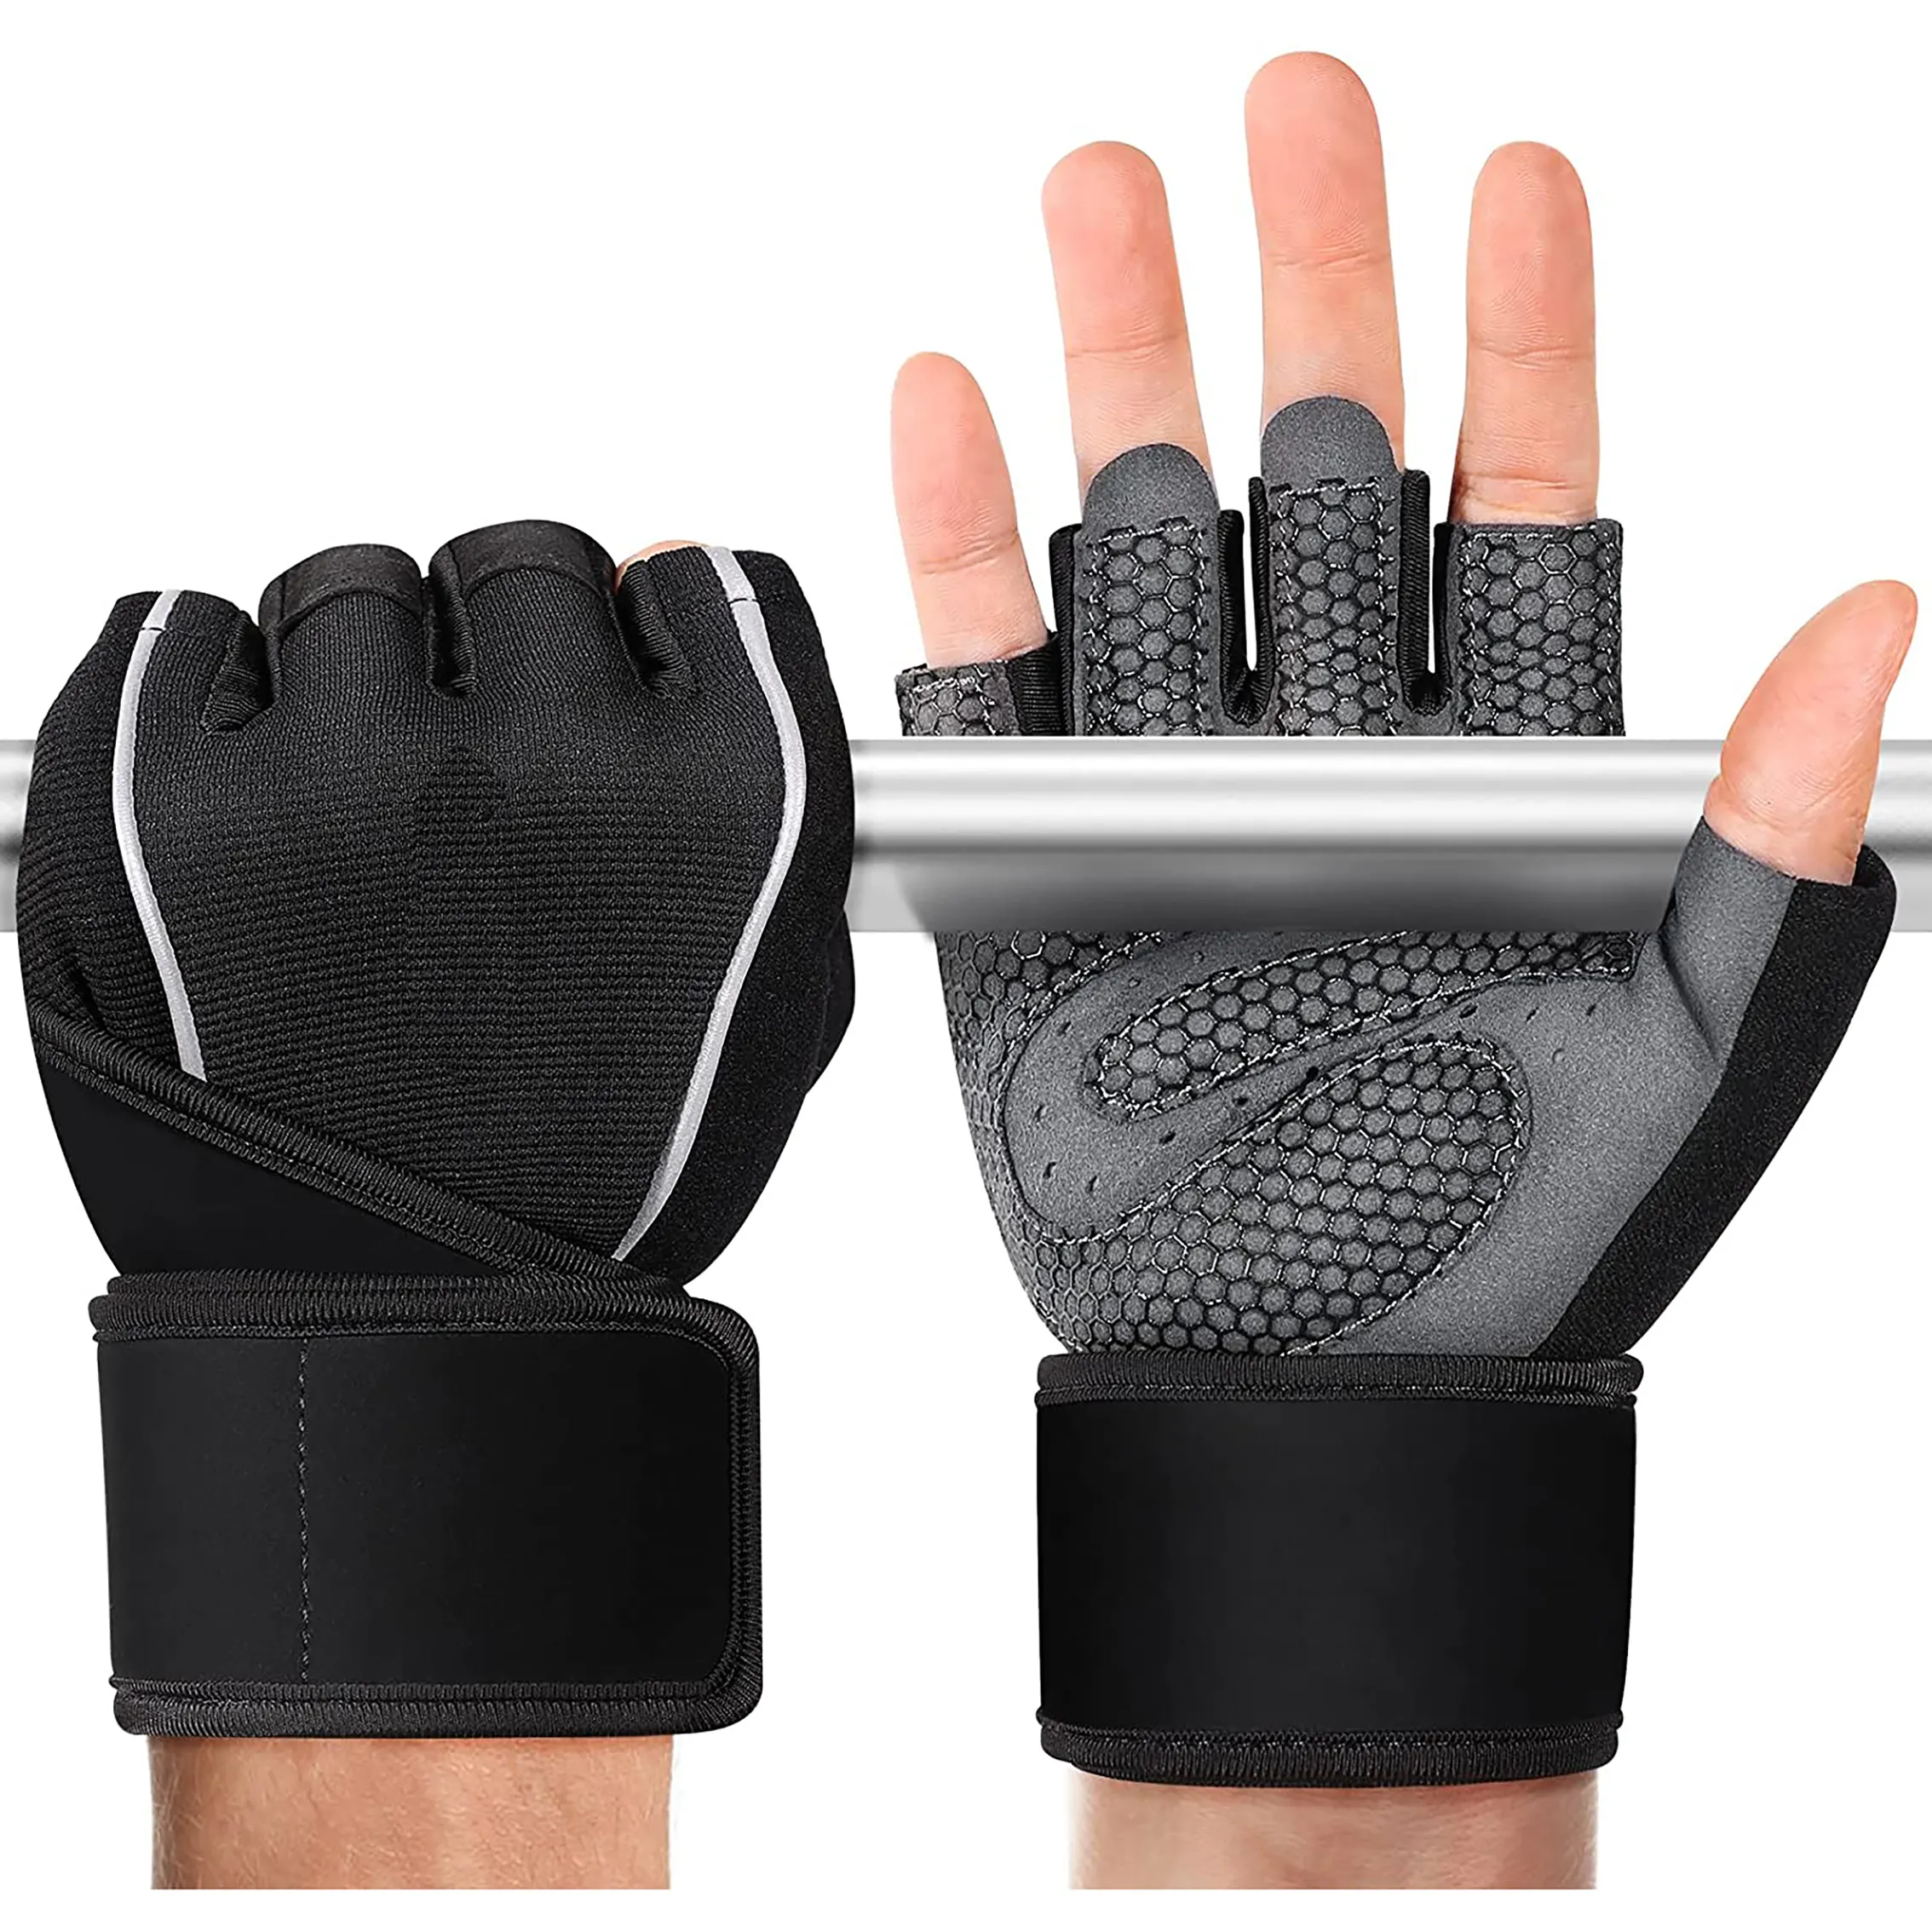 Breathable Palm Support Protection Training Fitness Sports Exercise Men Women Gym Cycling Gloves